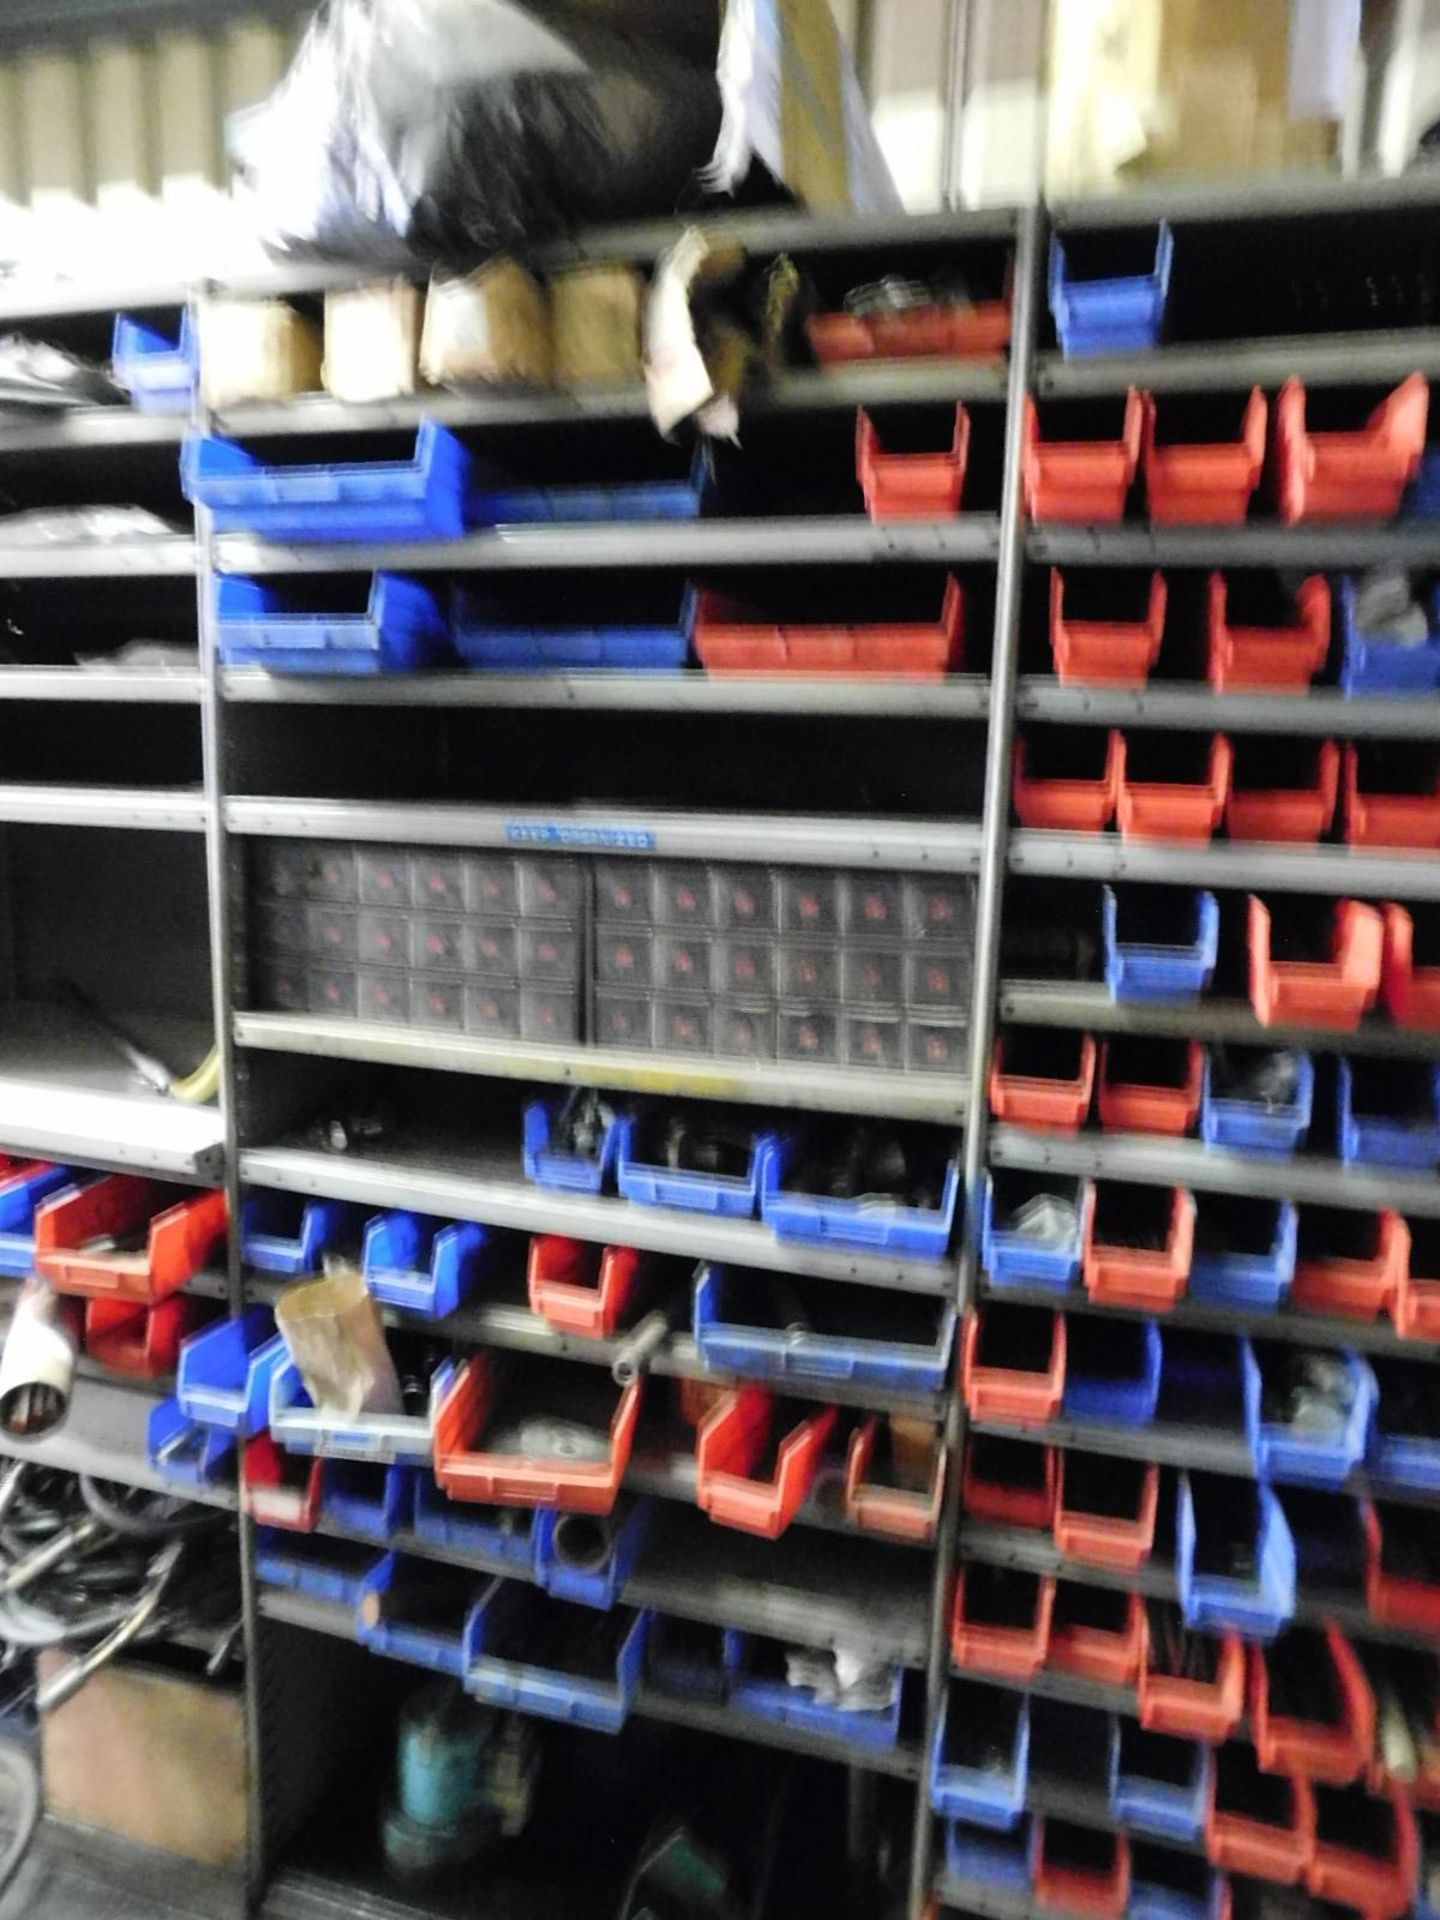 LOT - 18-1/2" OF 7' HEIGHT SHELVING FULL OF LARGE WRENCHES AND MISC HARDWARE - Image 2 of 6